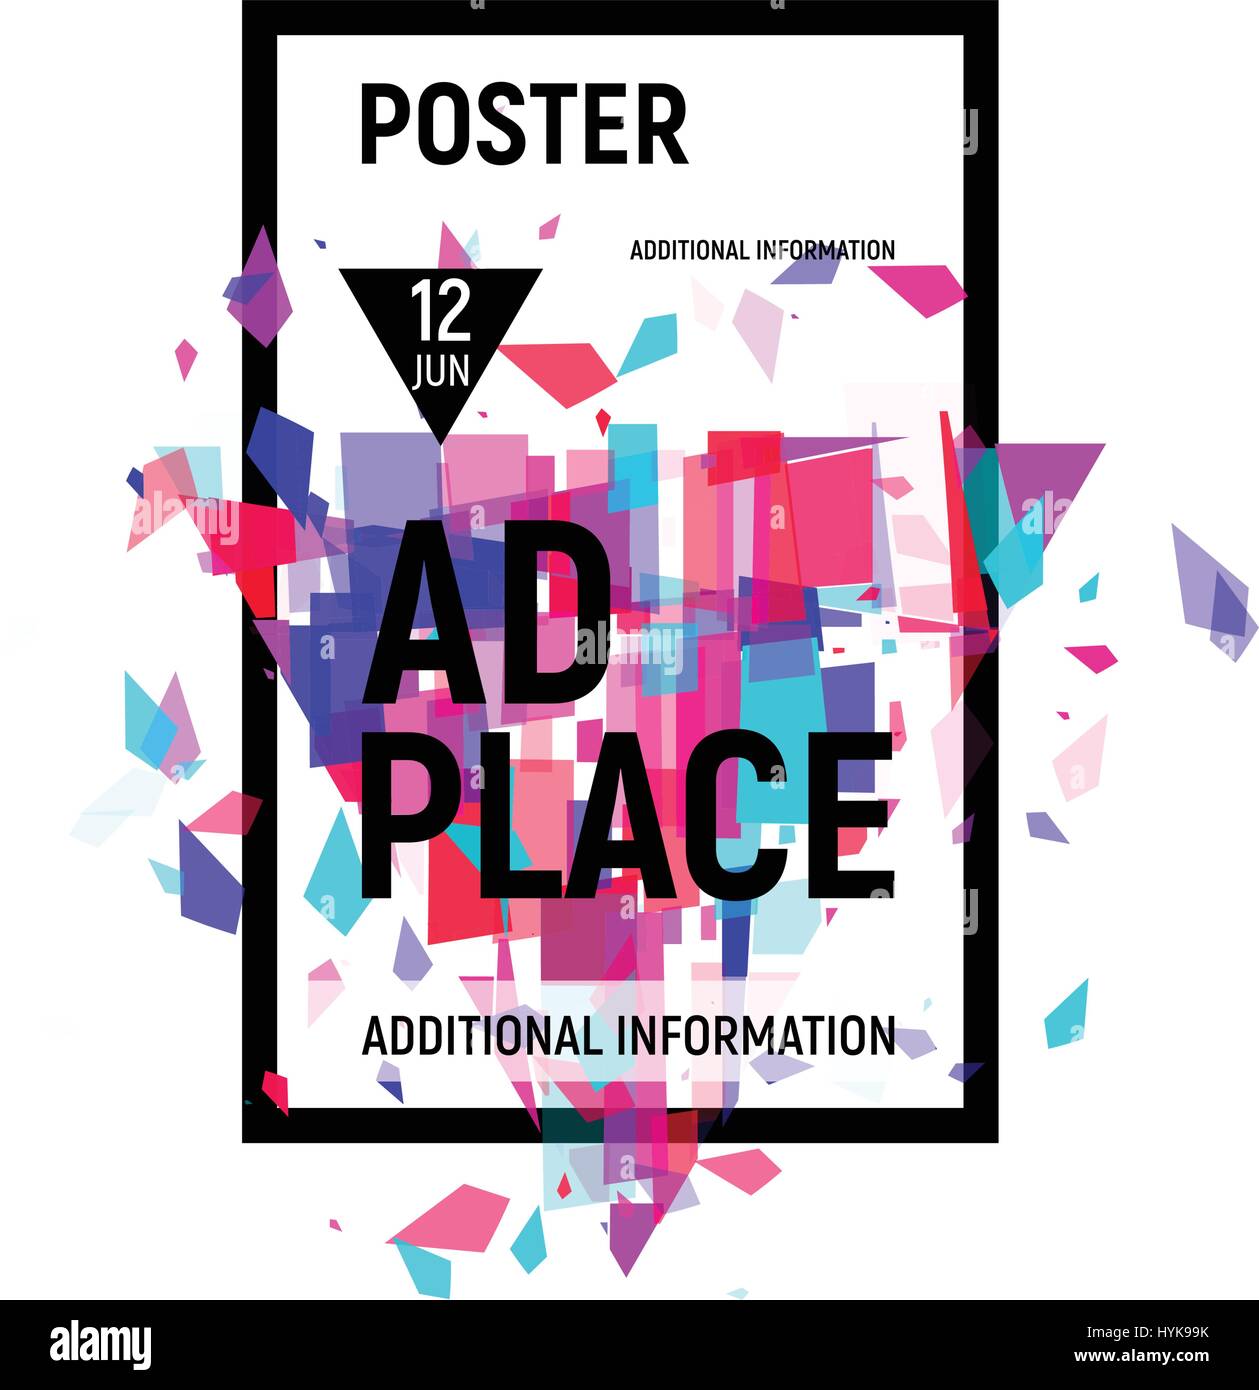 Isolated abstract colorful broken glass explosion in rectangular frame, ad place poster in pink shades,geometric elements vector illustration Stock Vector